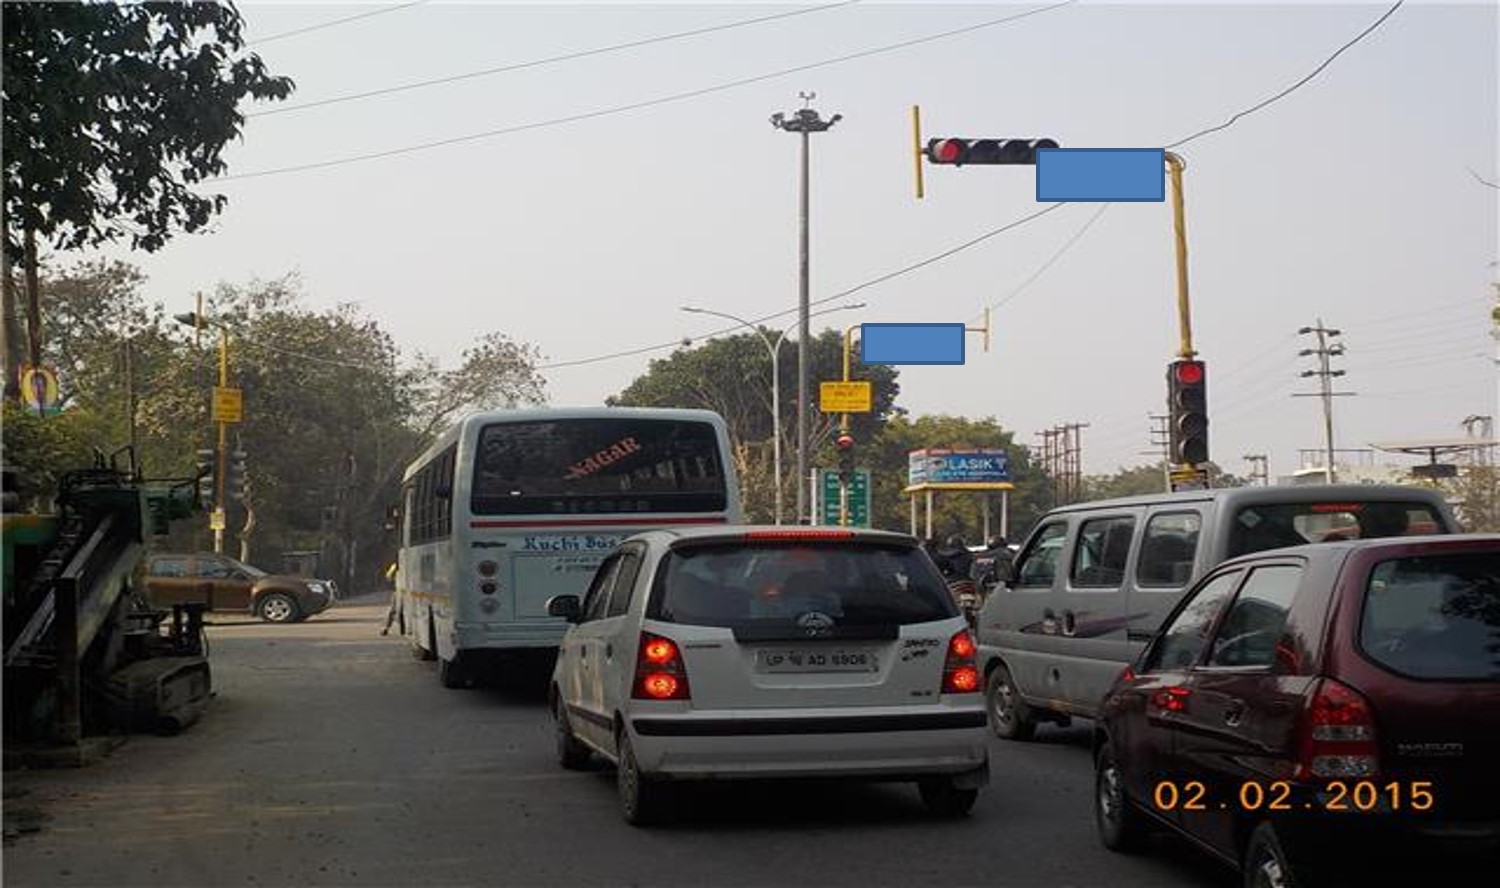 Traffic Signal At Sector-30,31,36 And 37 Crossing, Noida        